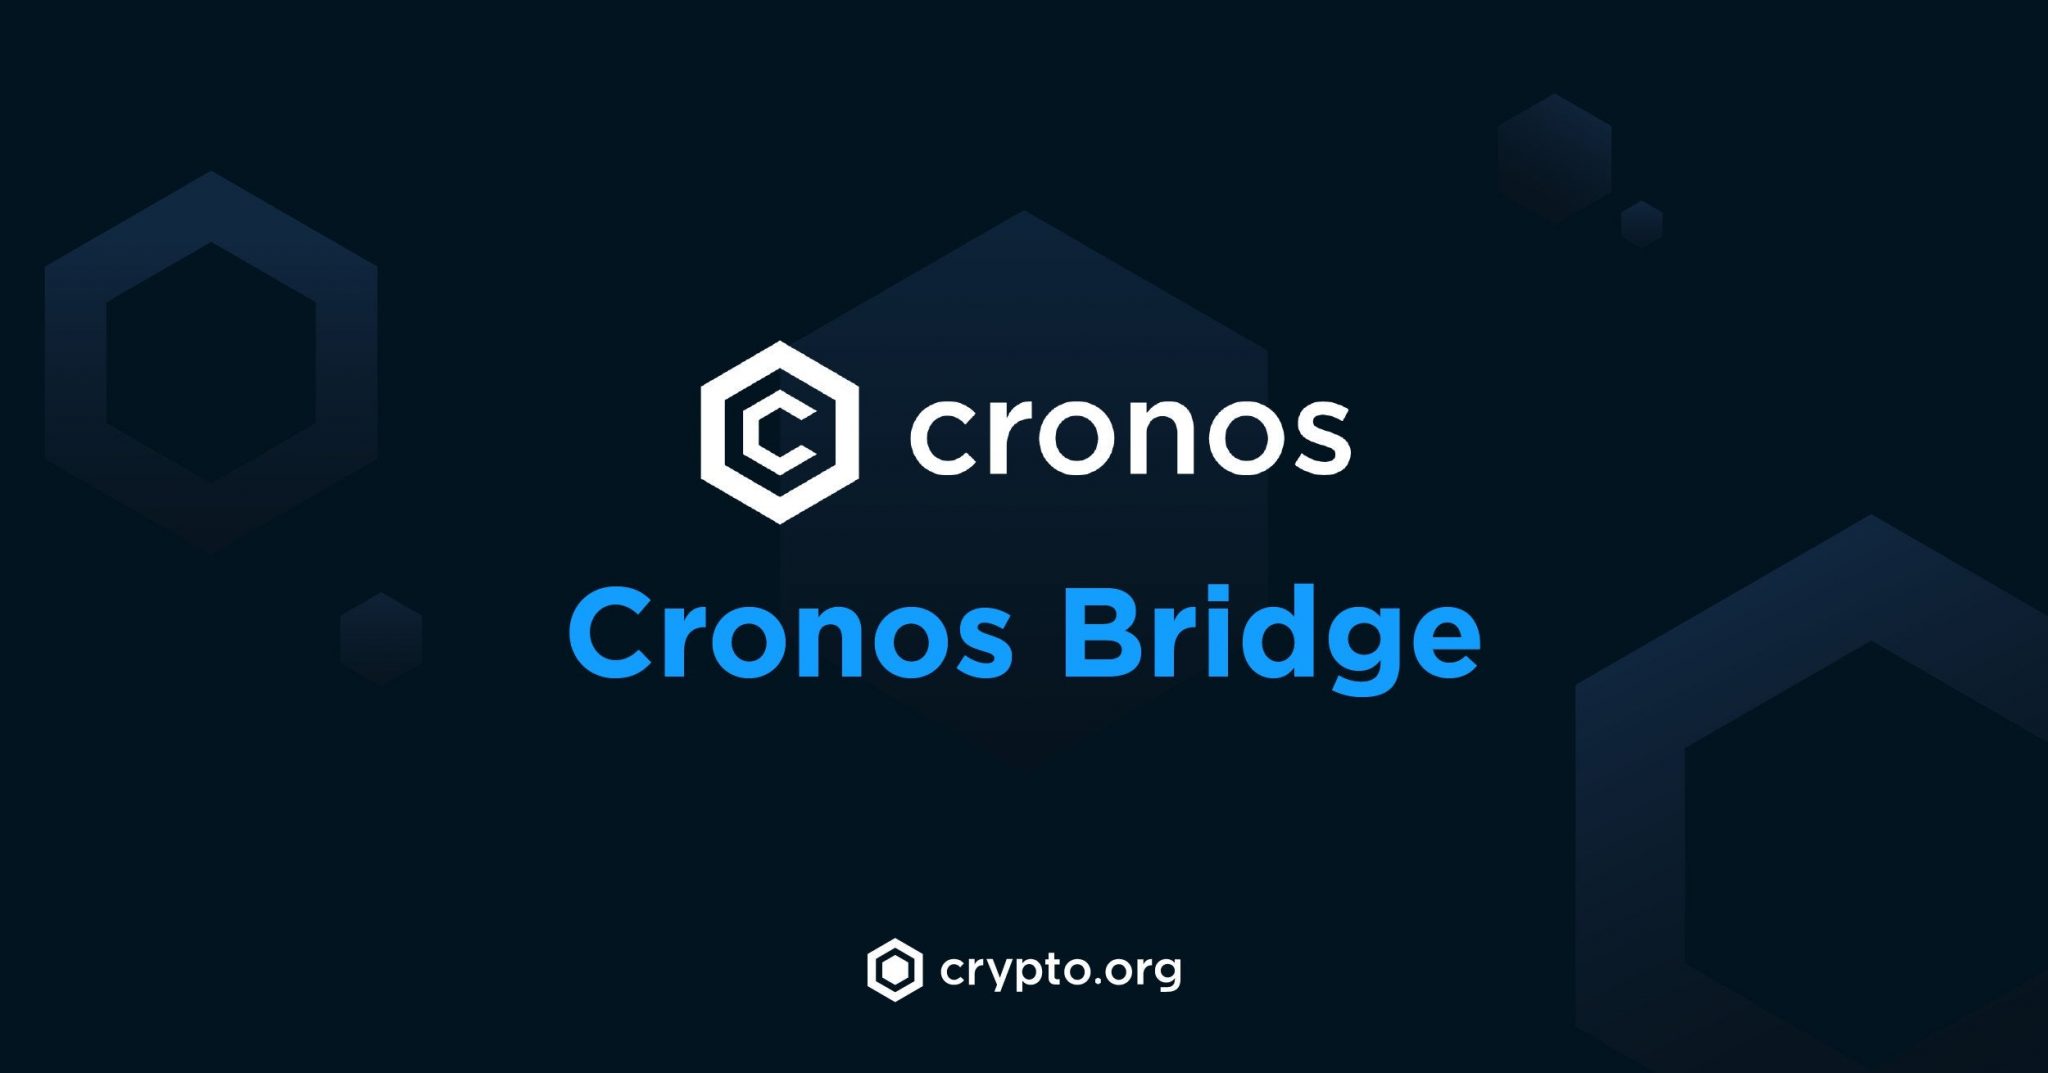 cronos crypto currency